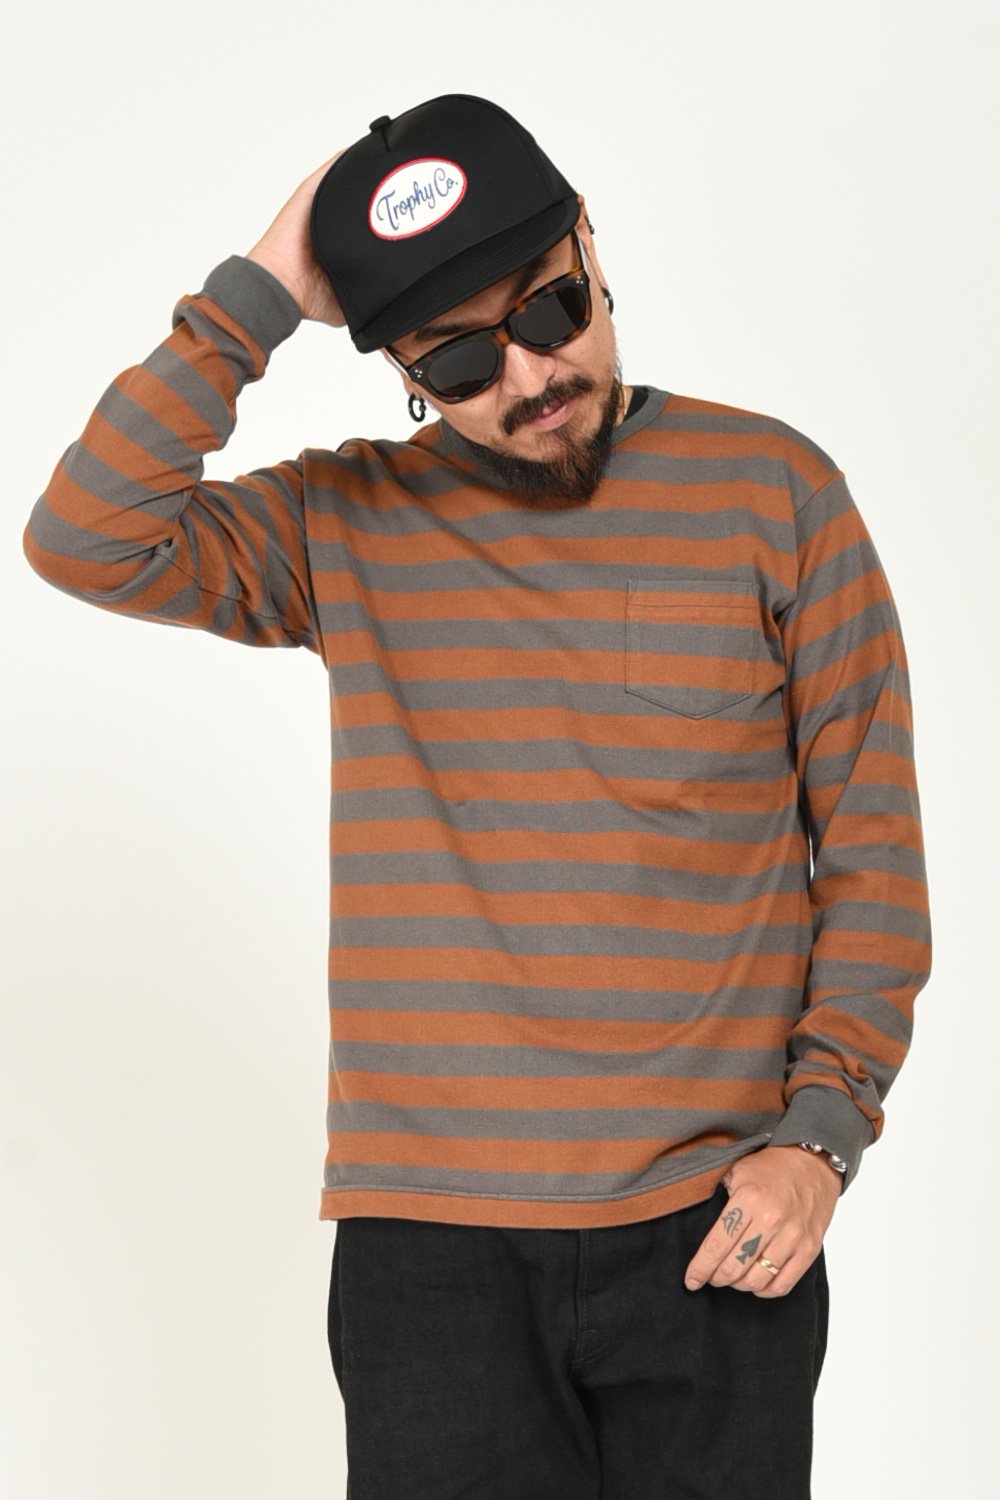 TROPHY CLOTHING(トロフィークロージング) ボーダーTシャツ MID BORDER L/S TEE TR19AW-201 通販正規取扱  ハーレムストア公式通販サイト